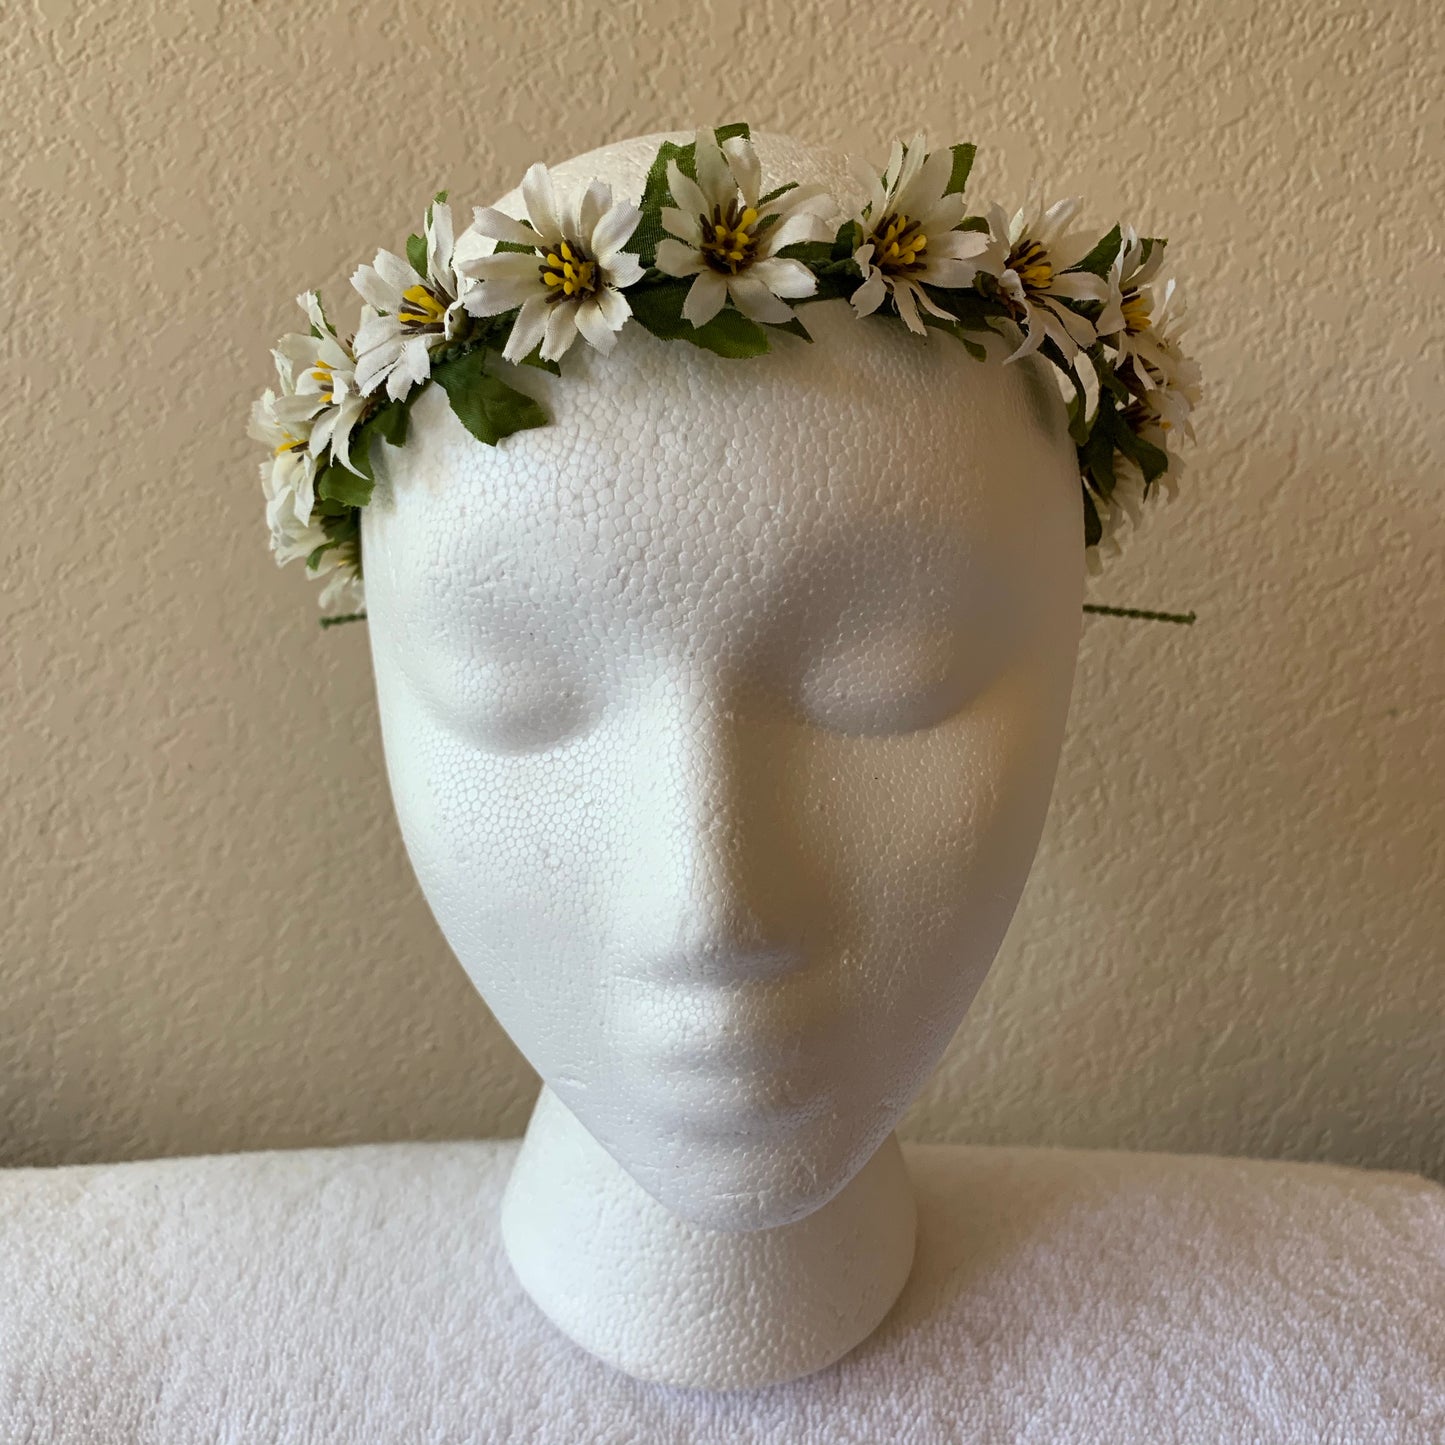 Extra Small Wreath - Off White Spiky Flowers with Yellow Centers